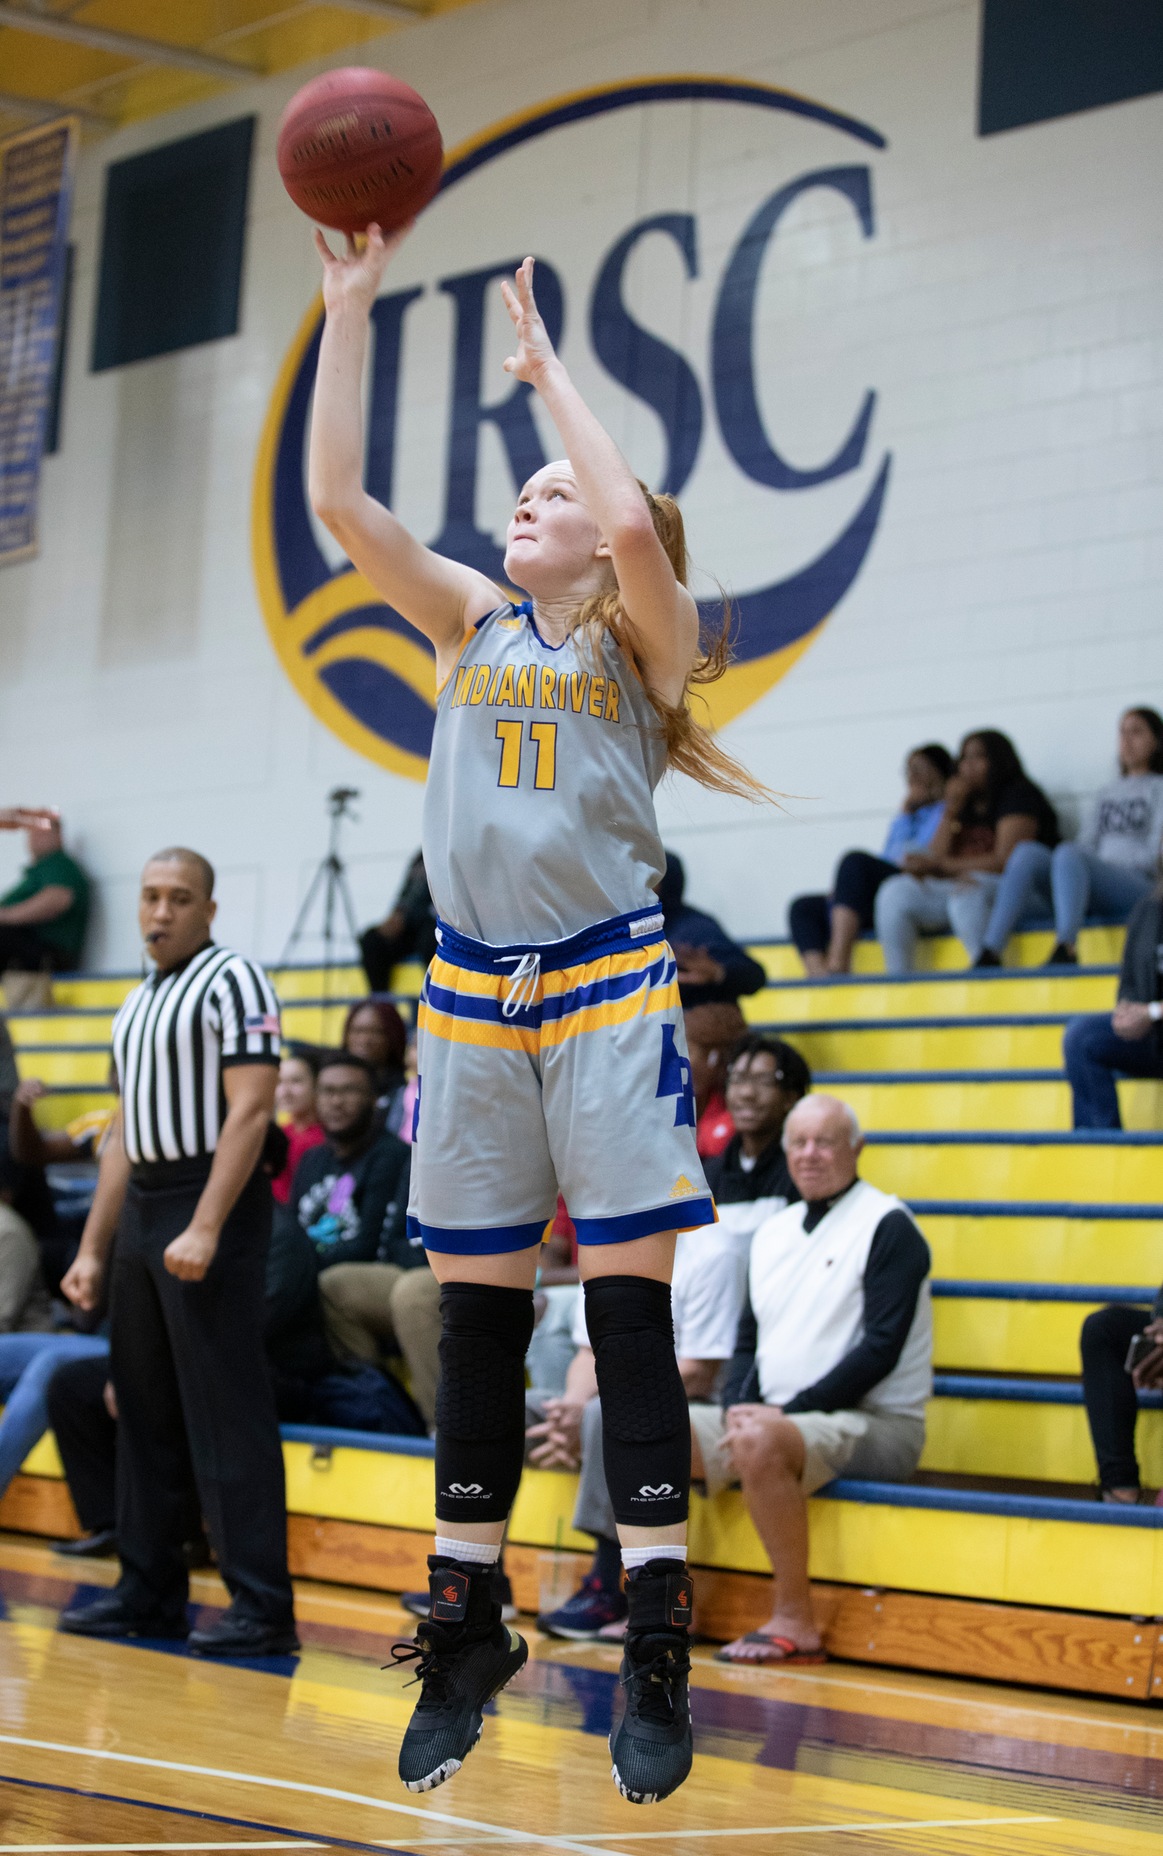 IRSC women’s basketball win on the road